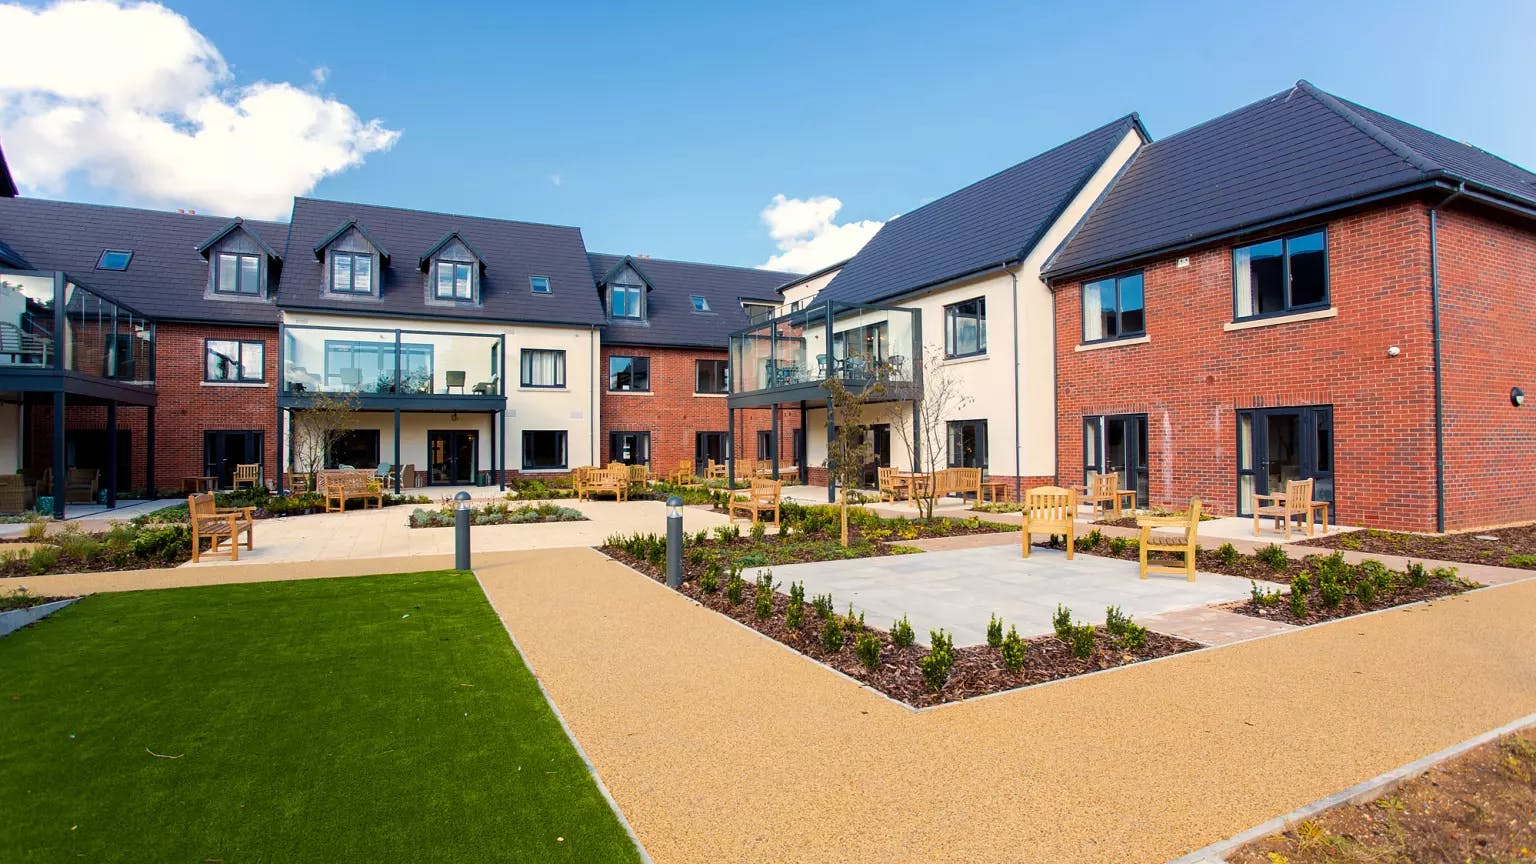 Exterior of Mantels Court care home in Biggleswade, Bedfordshire